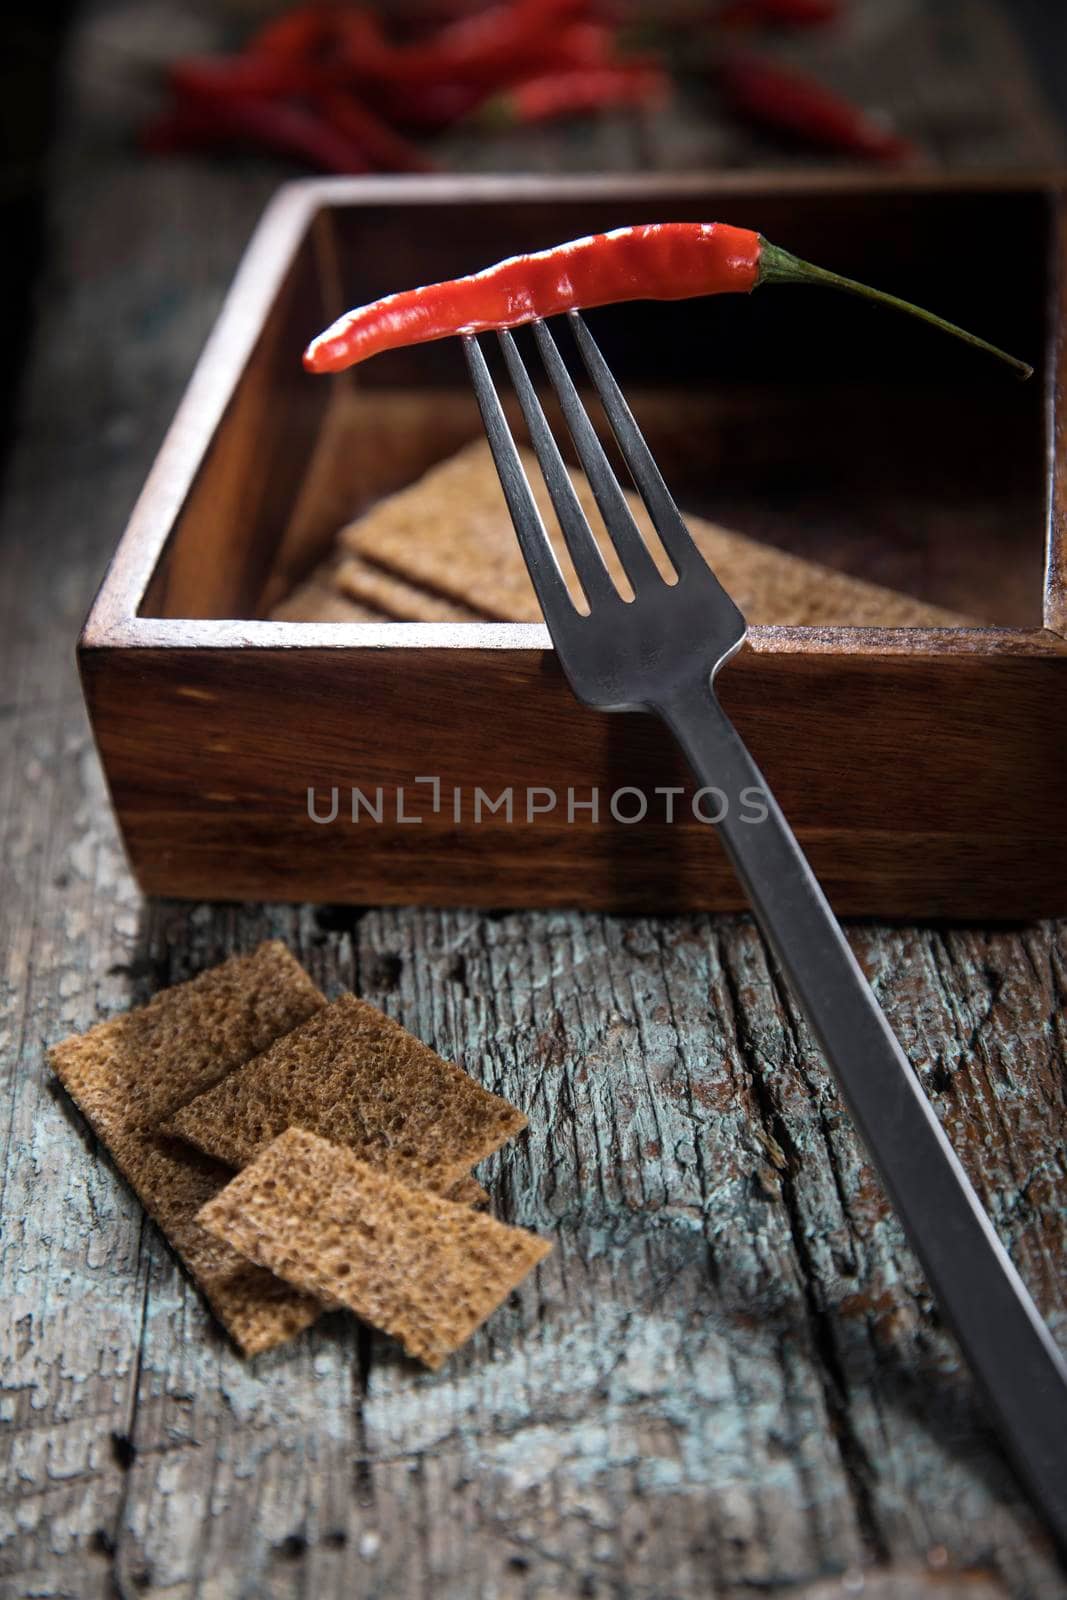 Hot chili peppers on a fork in a wooden mango tree box on a wooden bench by elenarostunova